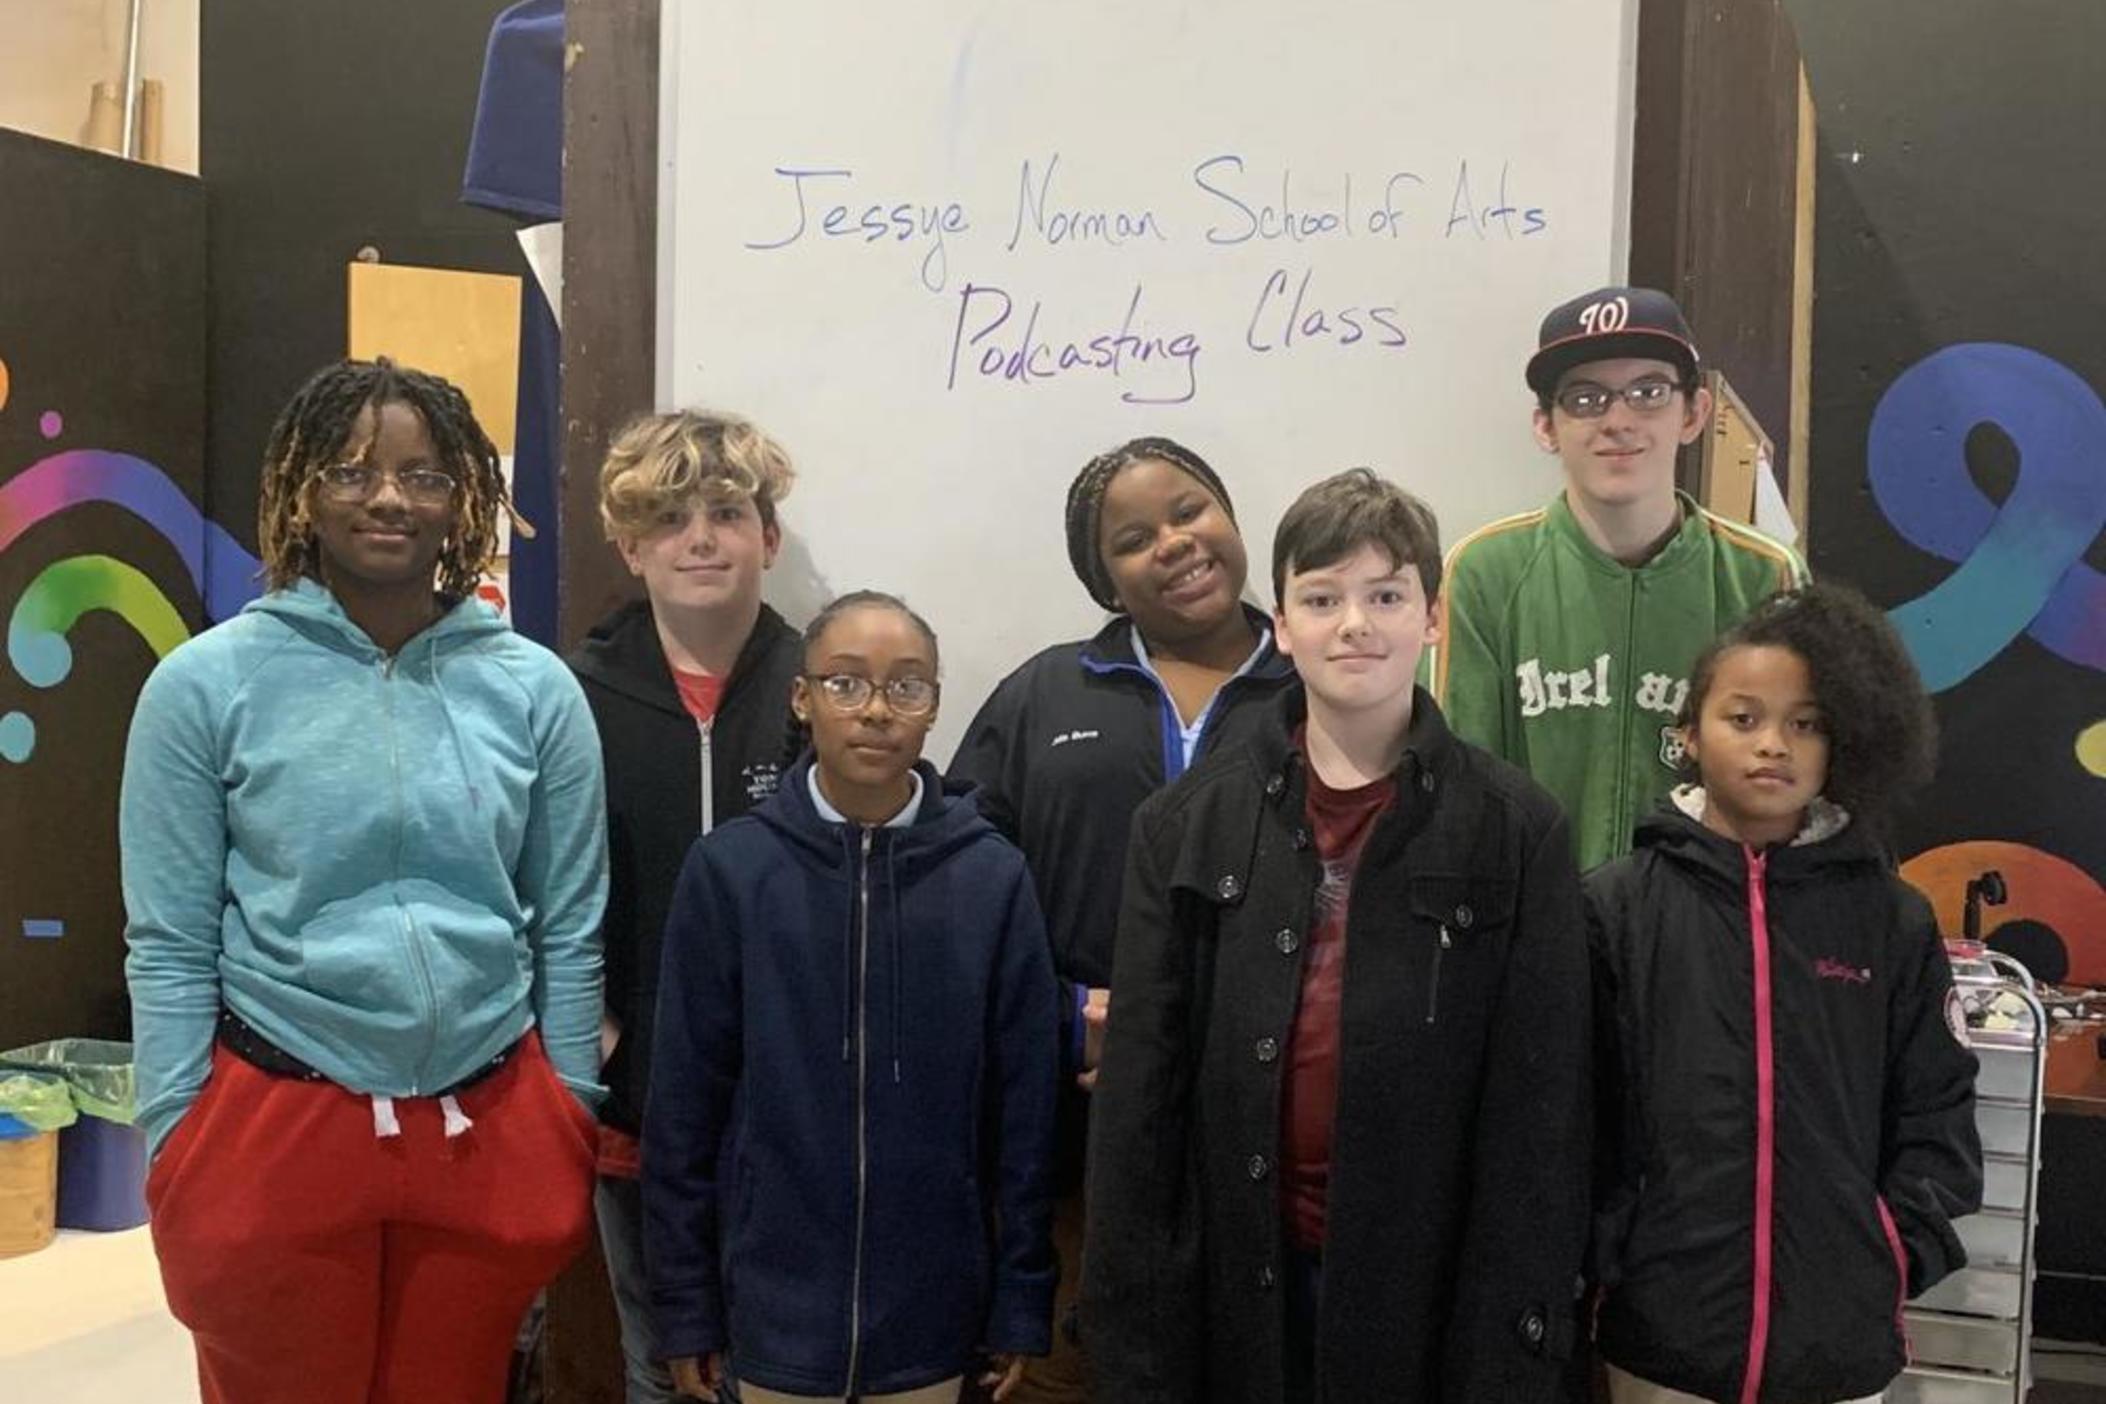 Students from the Jessye Norman School of the Arts, who are reporting for the podcast (l to r): Essence Willingham, Atticus Dillard-Wright, Kaleisha Sullivan, Jalia Burns, Aiden Allen, Thomas Collins, and Gabbie Stallings.